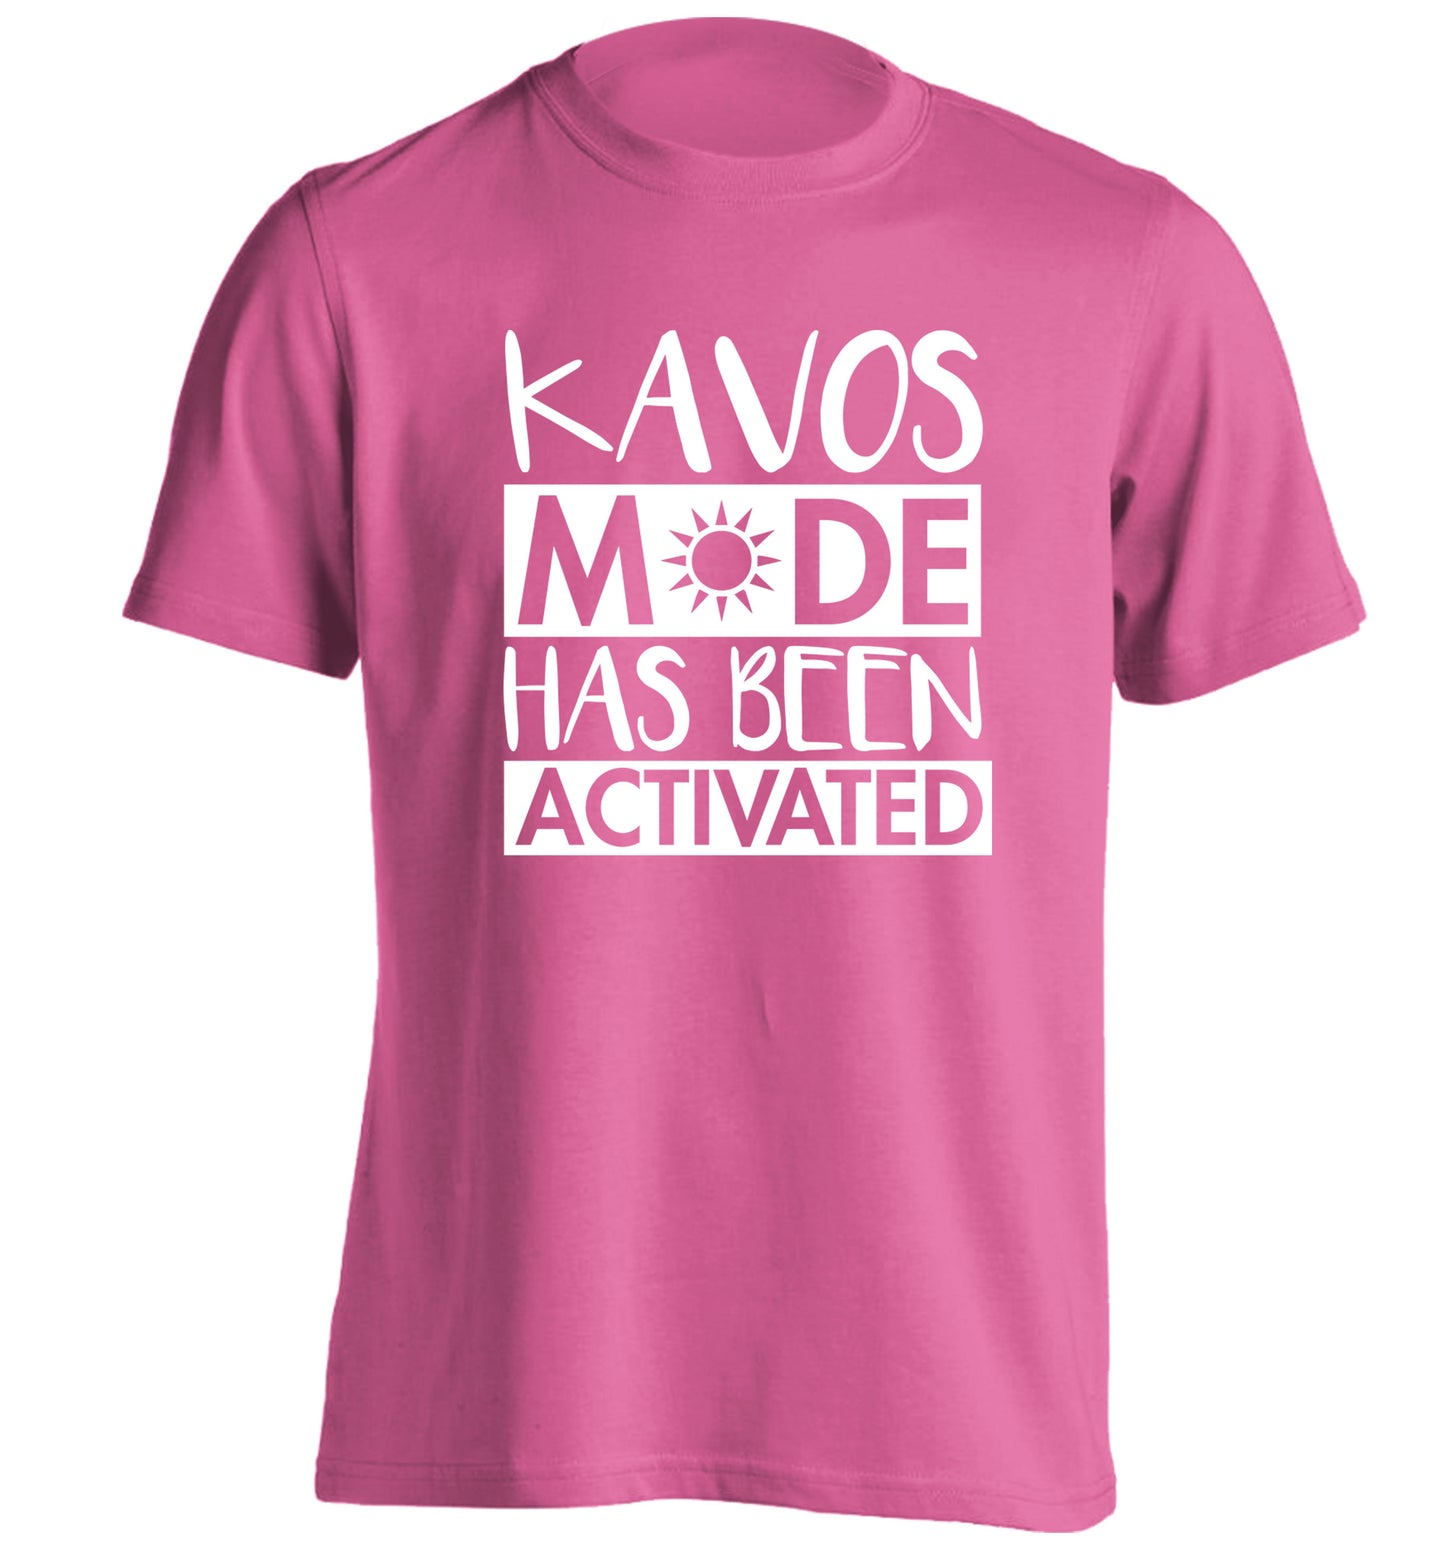 Kavos mode has been activated adults unisex pink Tshirt 2XL